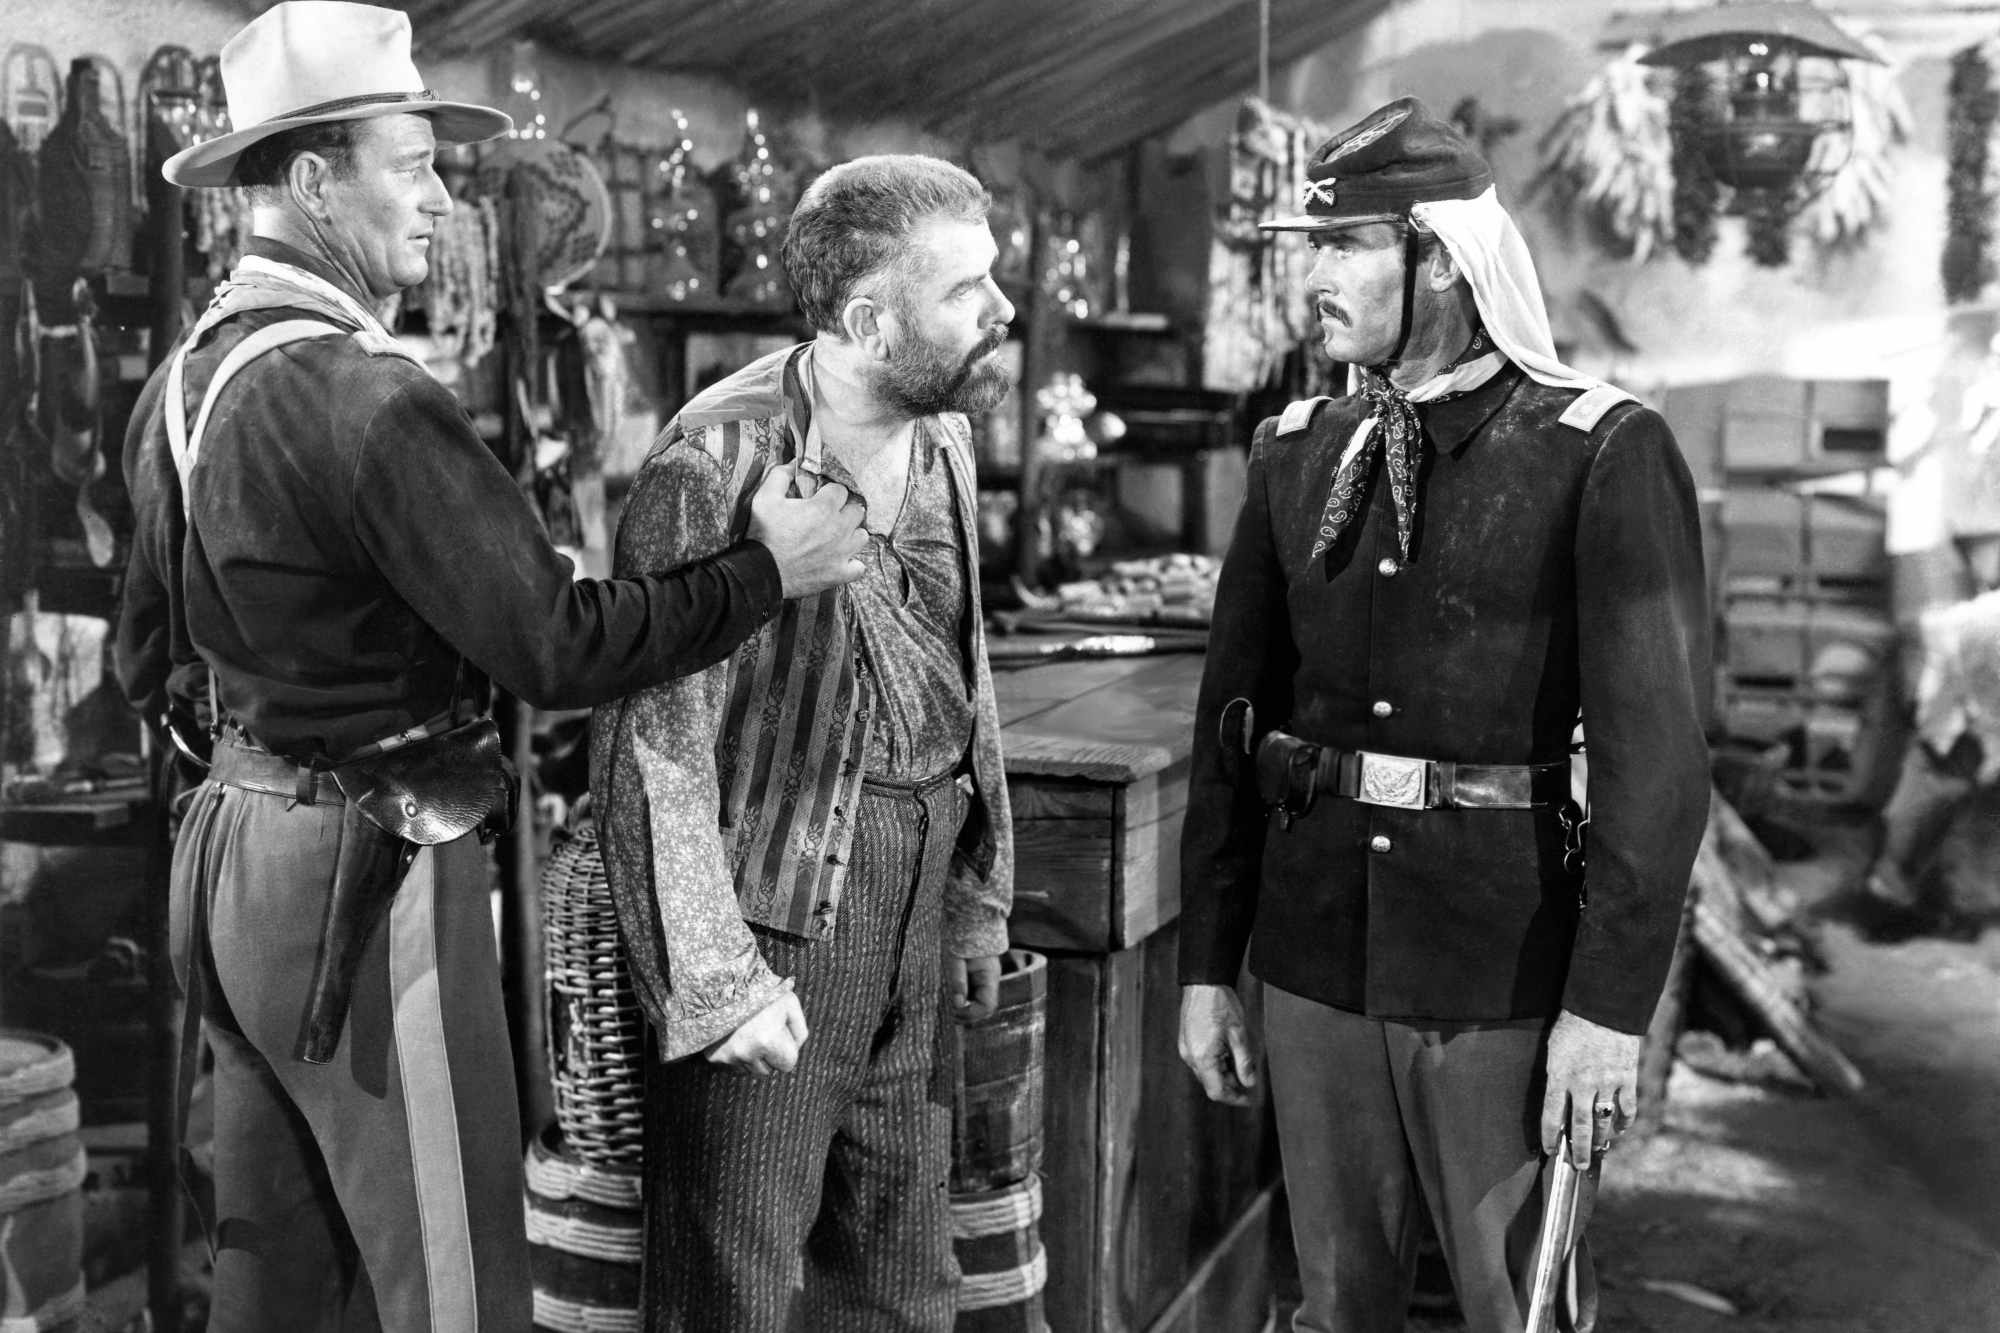 'Fort Apache' John Wayne as Capt. Kirby York, Grant Withers as Silas Meacham, and Henry Fonda as Lt. Col. Owen Thursday. Withers and Fonda looking frustrated, while Wayne holds back Withers.